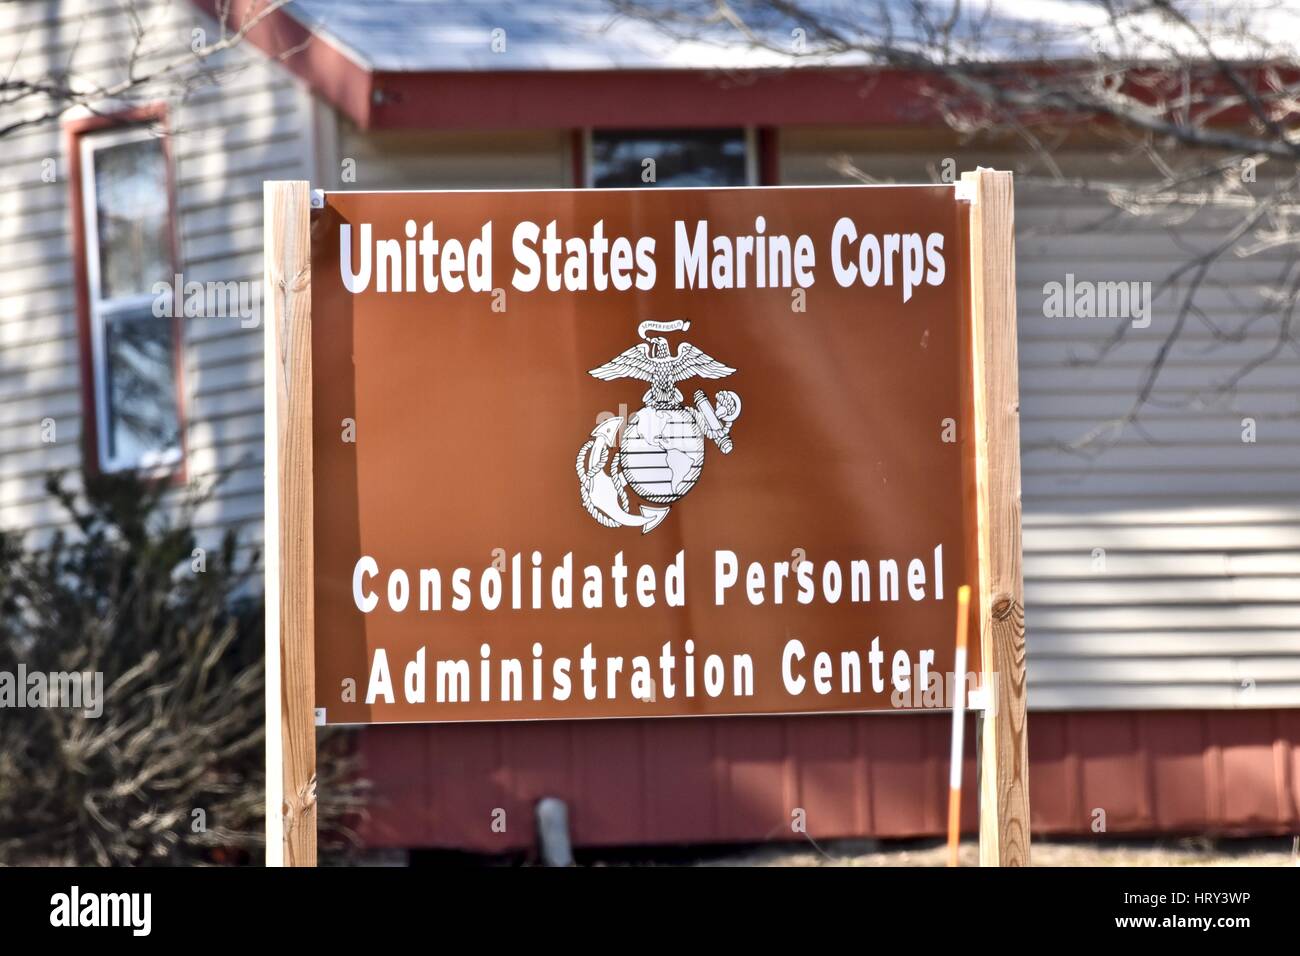 United States Marine Corps centre Personnel Banque D'Images